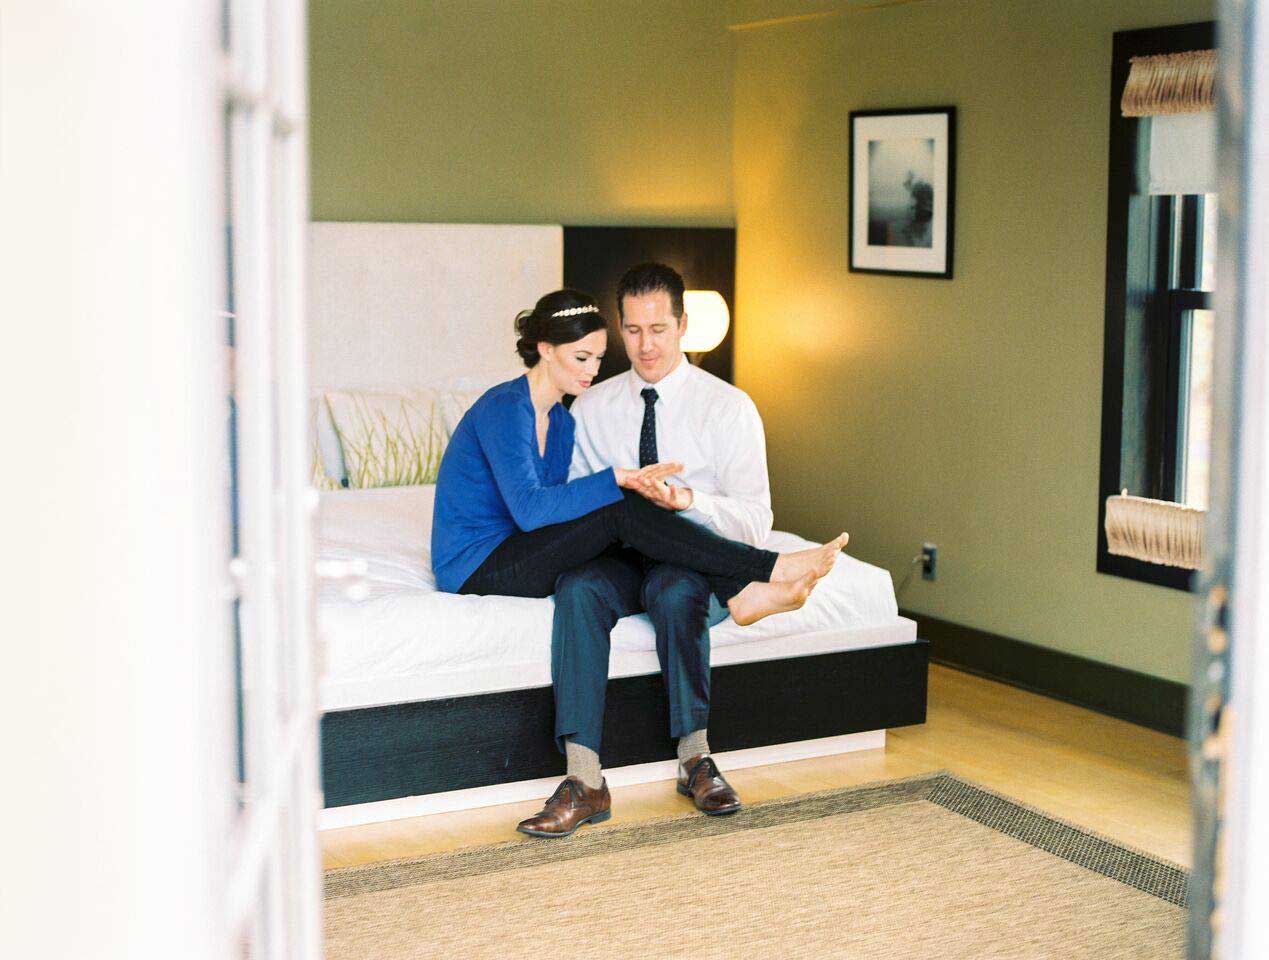 A man and woman staying at the lake house inn, sitting on a bed.